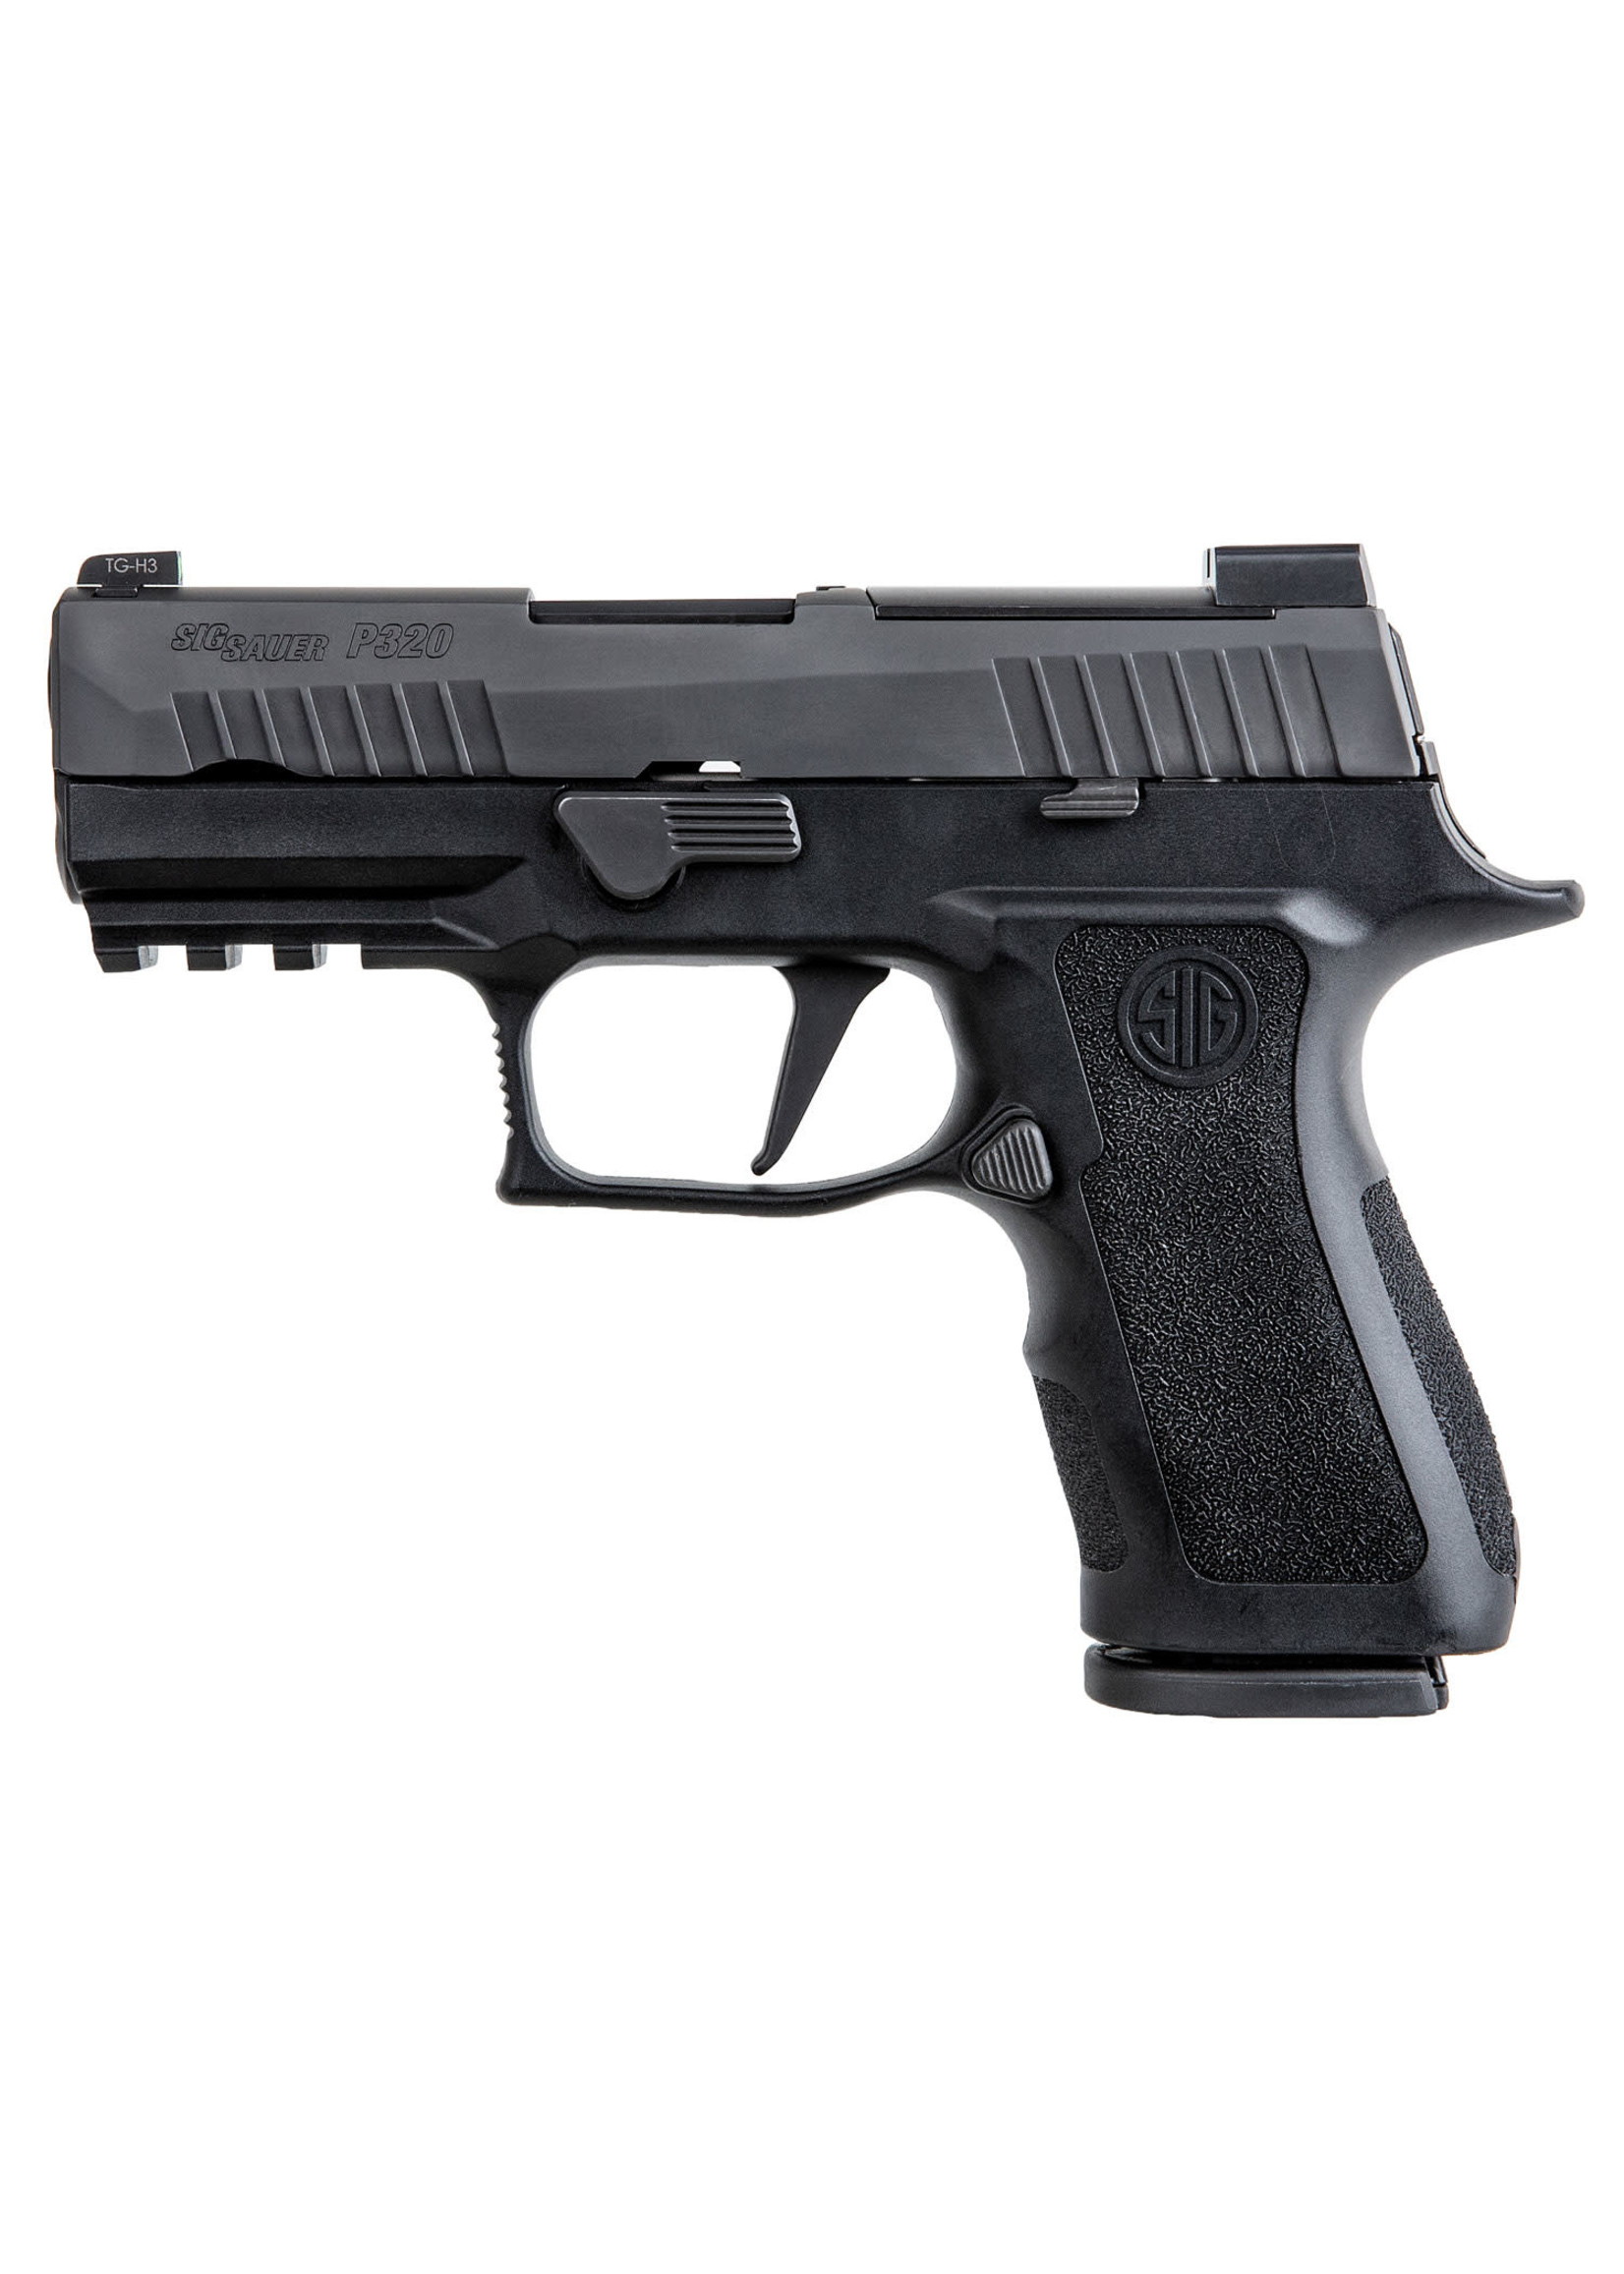 Sig Sauer Sig Sauer P320 XCompact 9mm Luger Caliber with 3.60" Barrel, 15+1 Capacity, Overall Black Finish Stainless Steel, Picatinny Rail Frame, Serrated Nitron Slide, Polymer Grip & XRAY3 Day/Night Sights